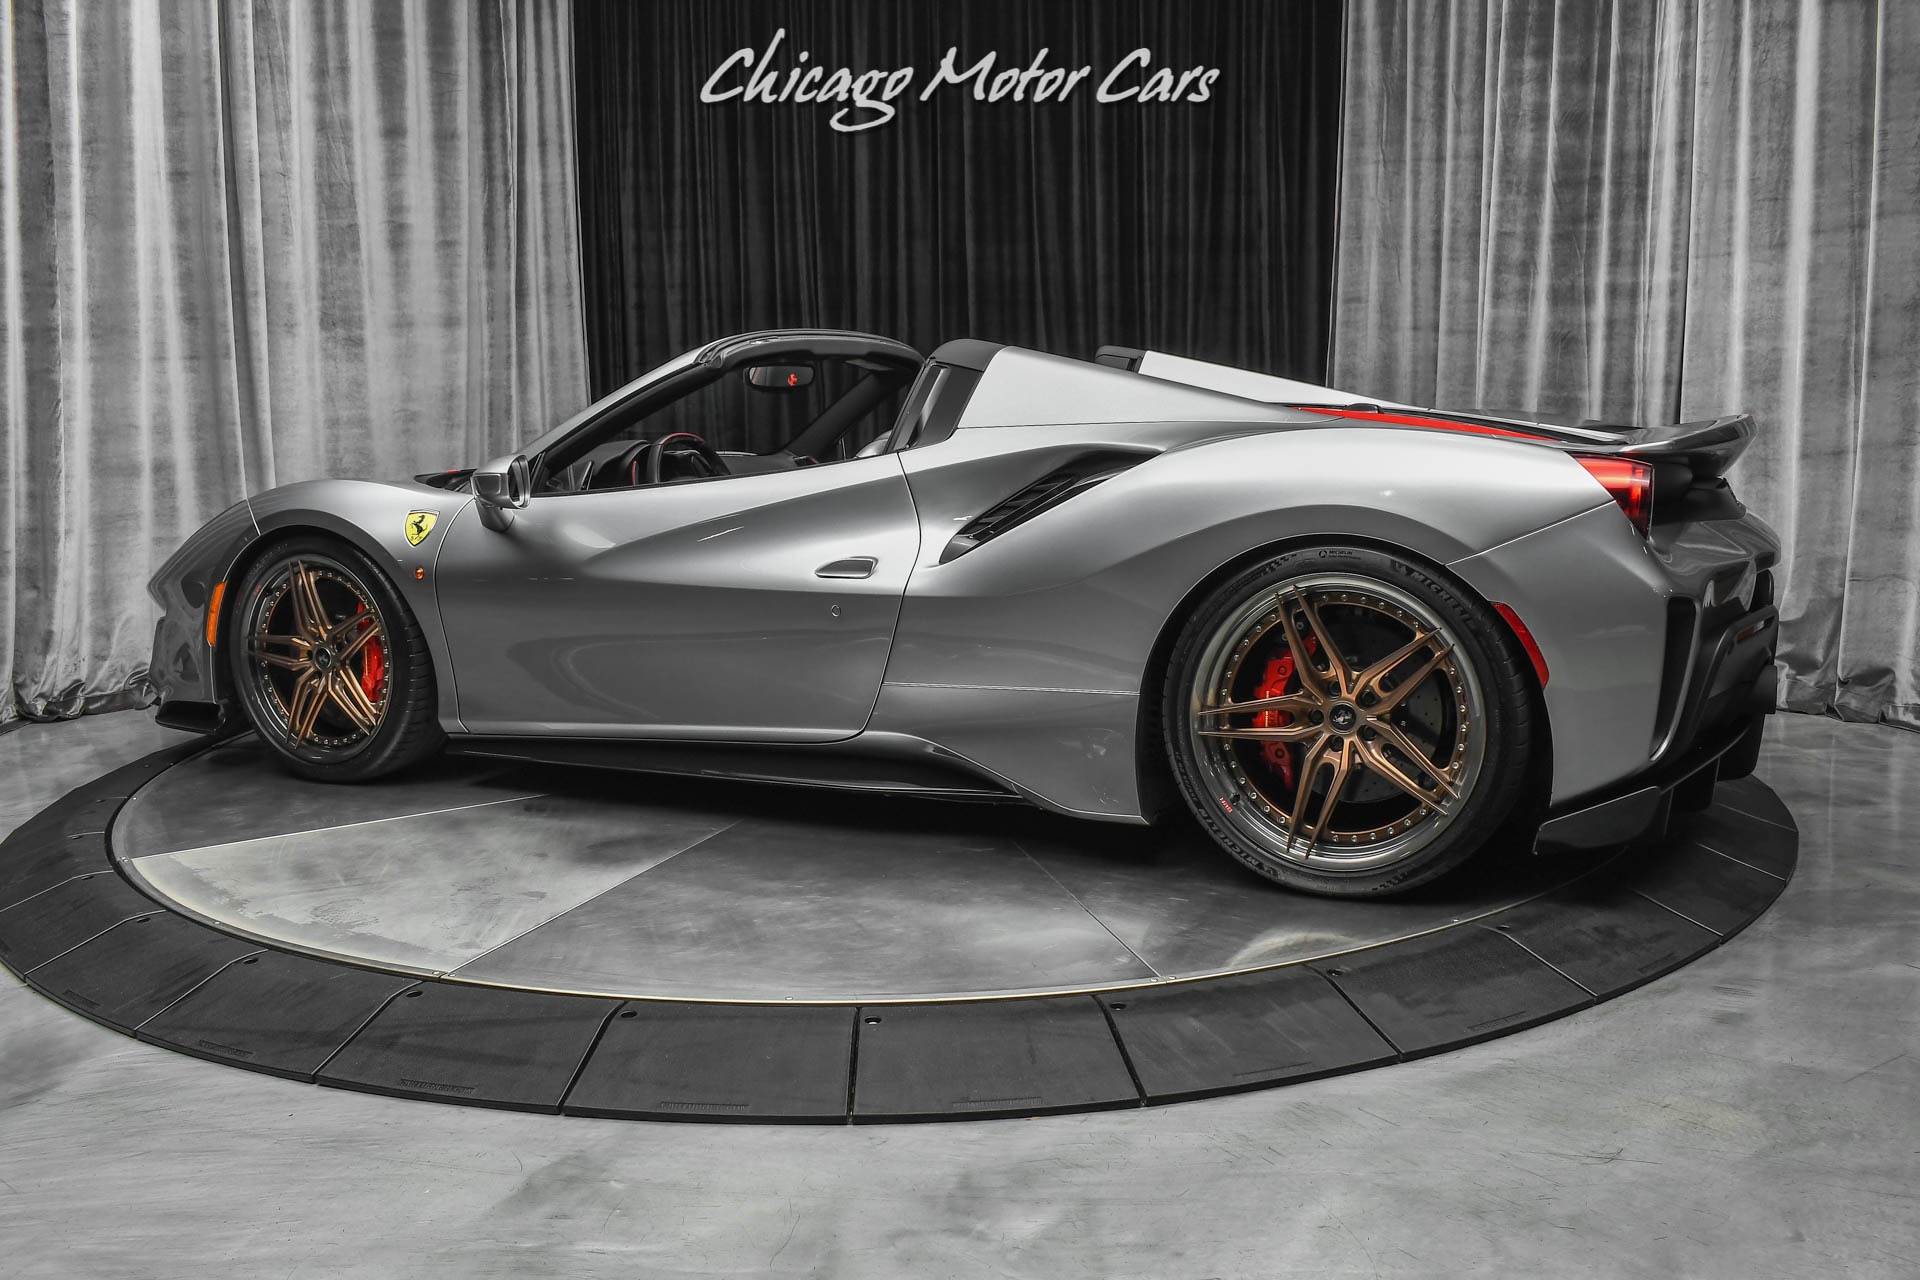 Used-2019-Ferrari-488-Pista-Spider-Convertible-HRE-WHEELS-IPE-EXHAUST-ONLY-900-MILES-LOADED